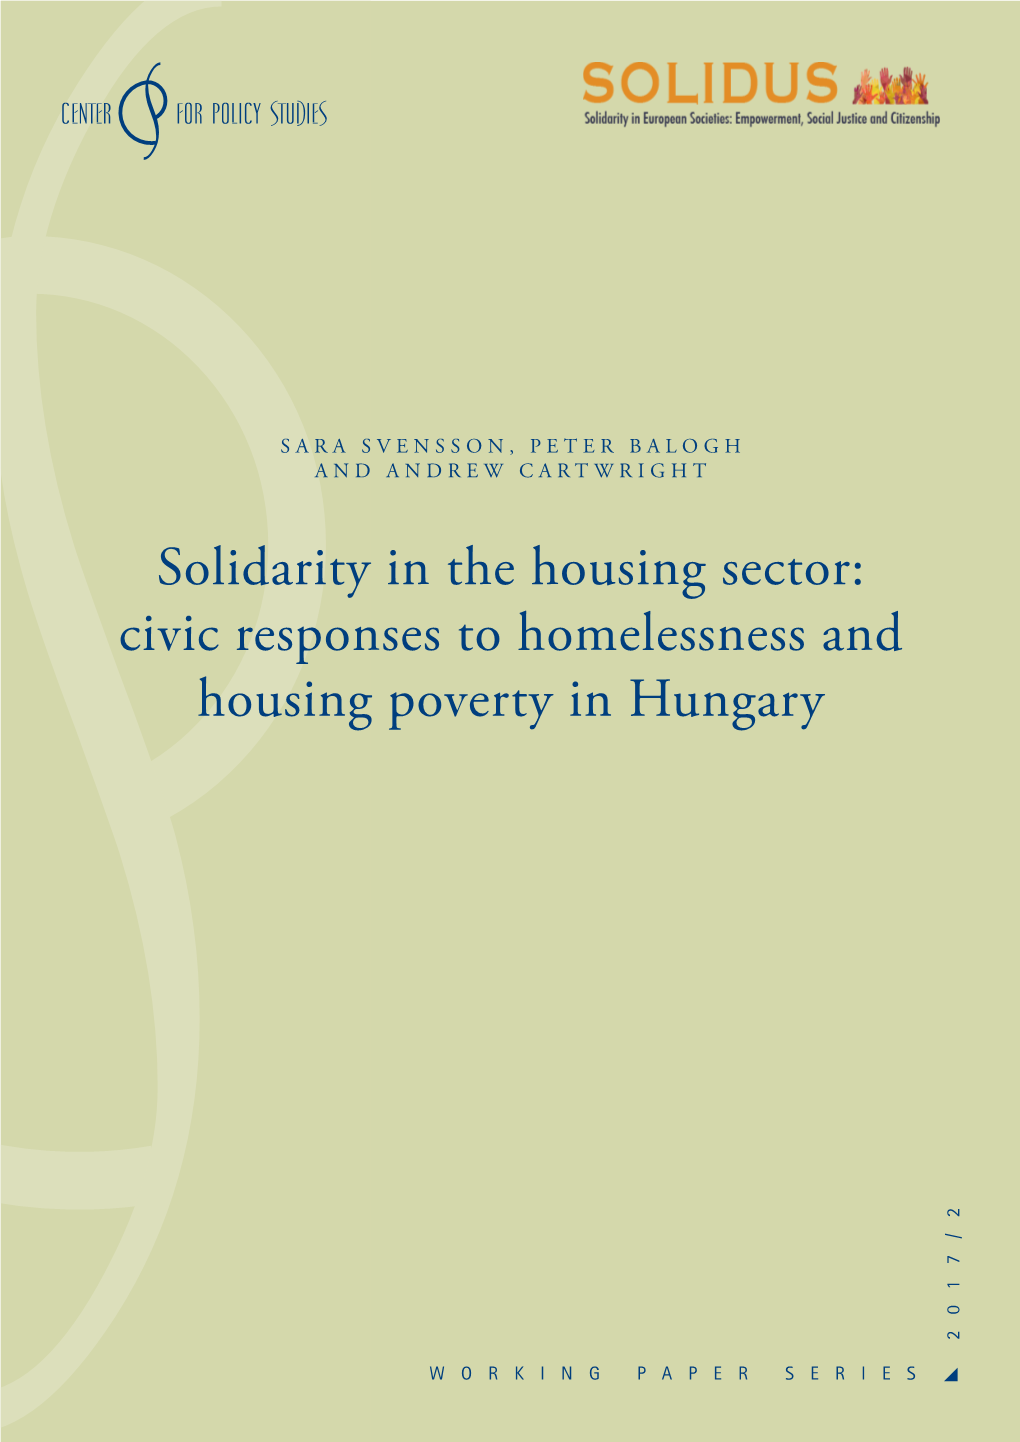 Solidarity in the Housing Sector: Civic Responses to Homelessness and Housing Poverty in Hungary 2017/2